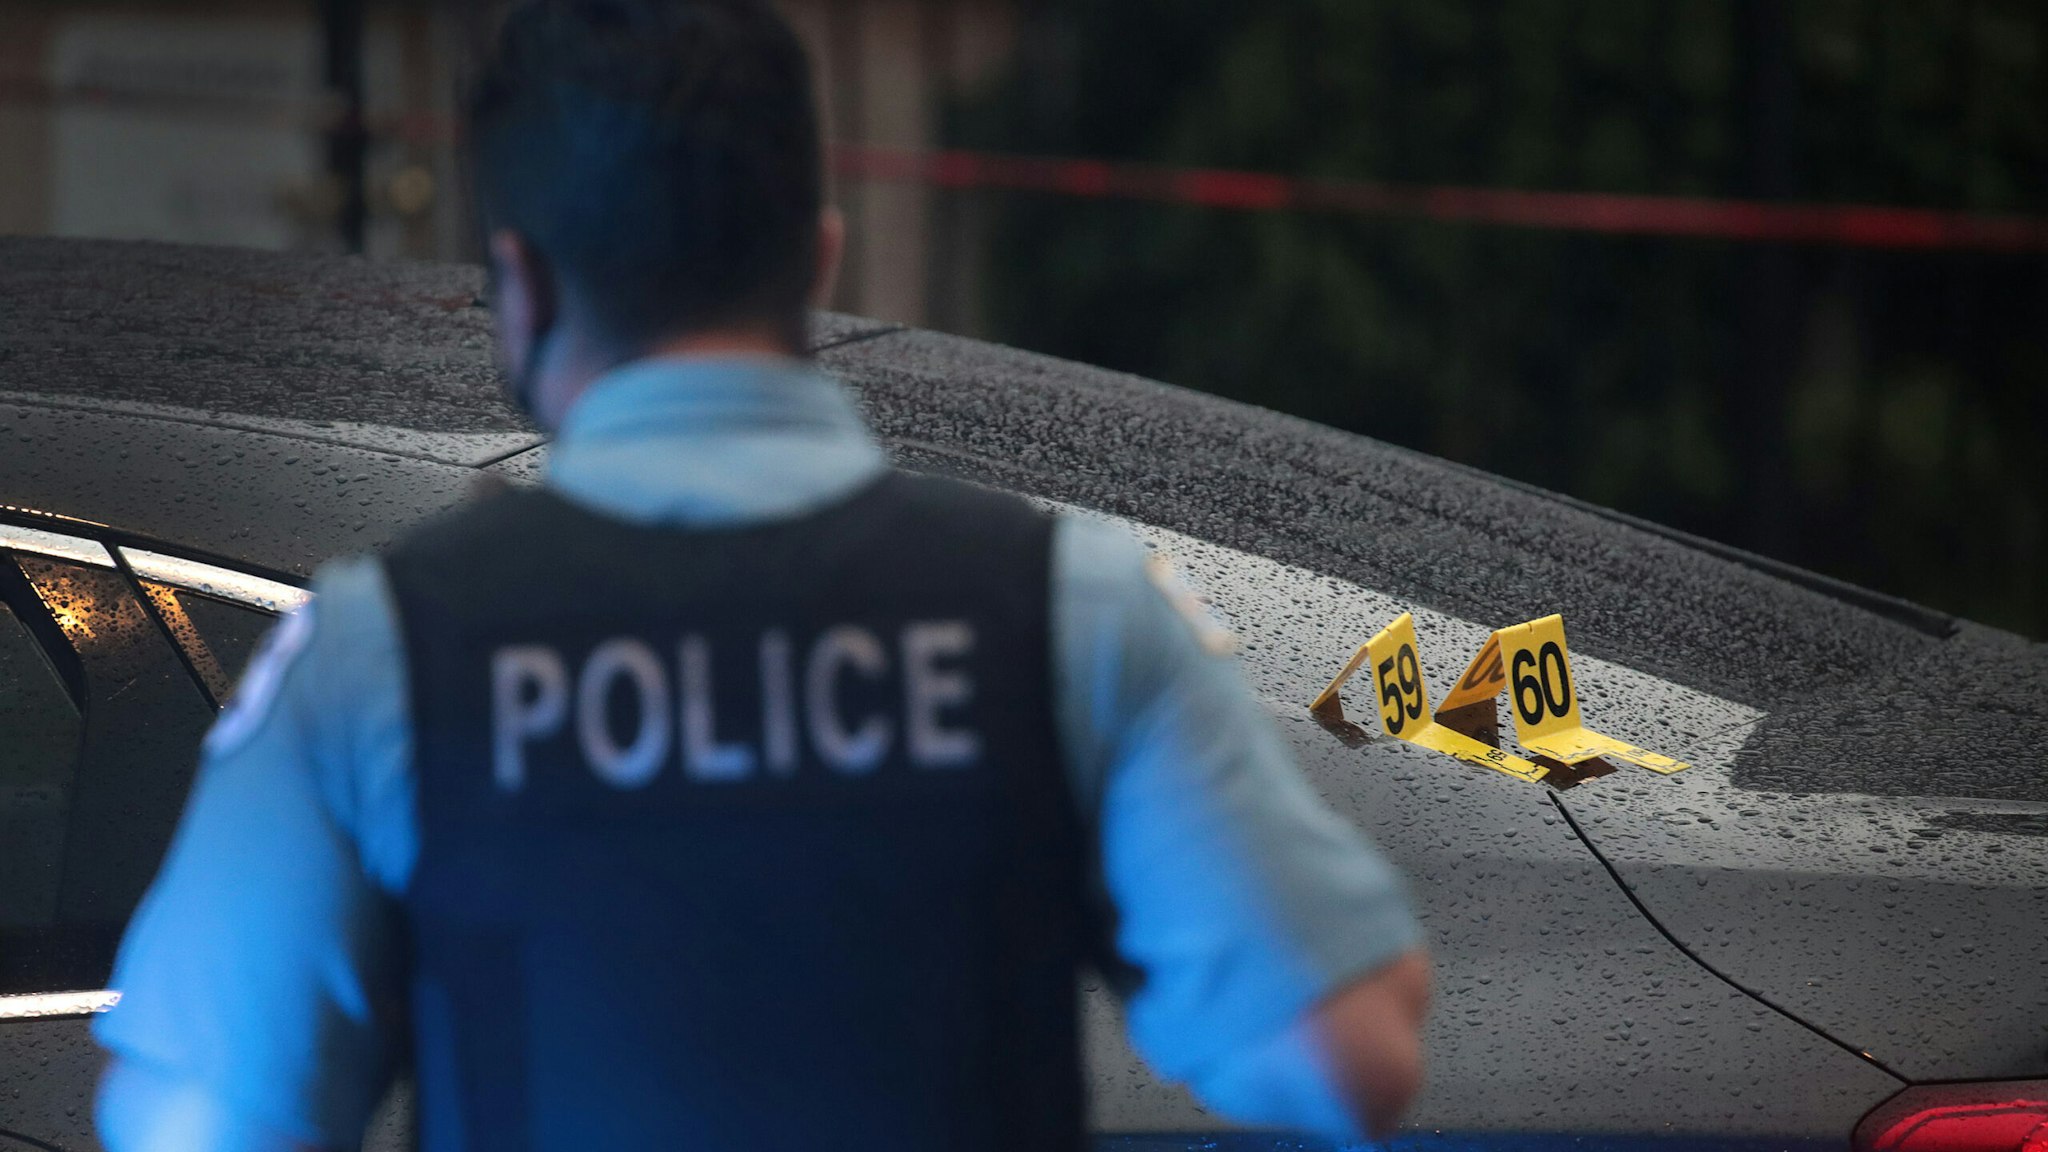 CHICAGO, ILLINOIS - JULY 21: Shell casings labeled 59 and 60 rest on a bullet-riddled car as police investigate the scene of a shooting in the Auburn Gresham neighborhood on July 21, 2020 in Chicago, Illinois. At least 14 people were transported to area hospitals after several gunmen, believed to be in the car, opened fire on mourners standing outside a funeral home. The car crashed and the occupants fled after mourners returned fire. More than 2000 people have been shot and more than 400 have been murdered in Chicago so far this year. (Photo by Scott Olson/Getty Images)